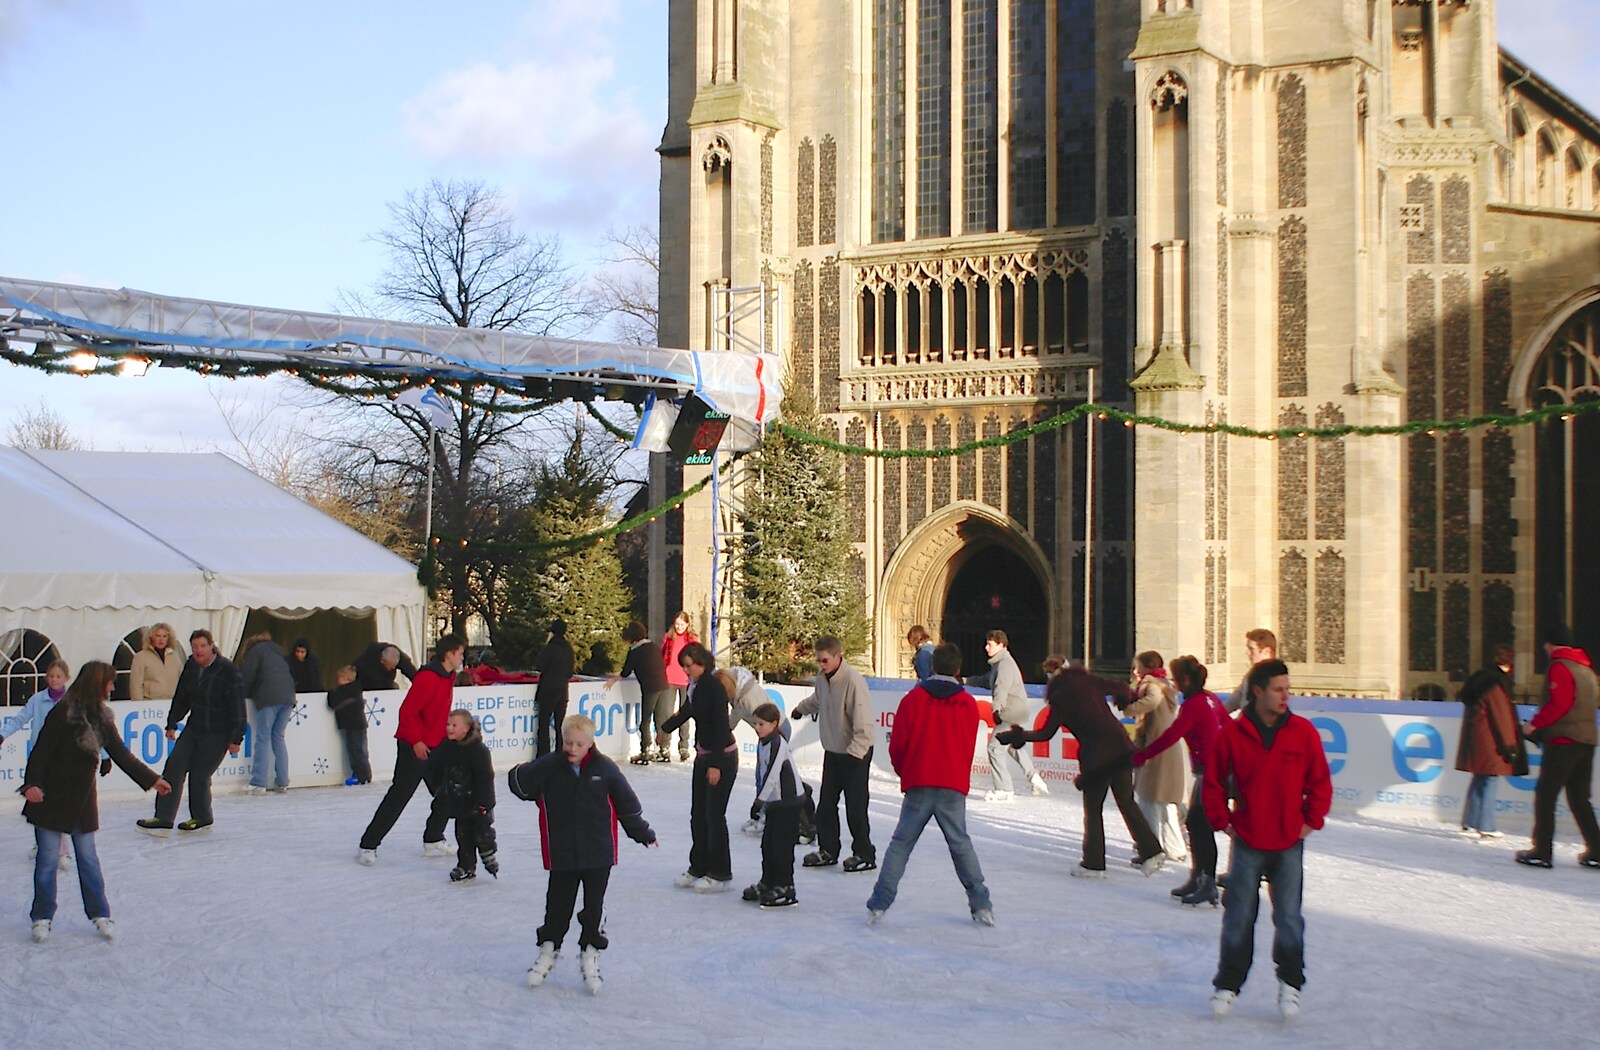 Skaters outside St. Peter Mancroft from Christmas Shopping and a Carol Service, Norwich and Thrandeston - 19th December 2004